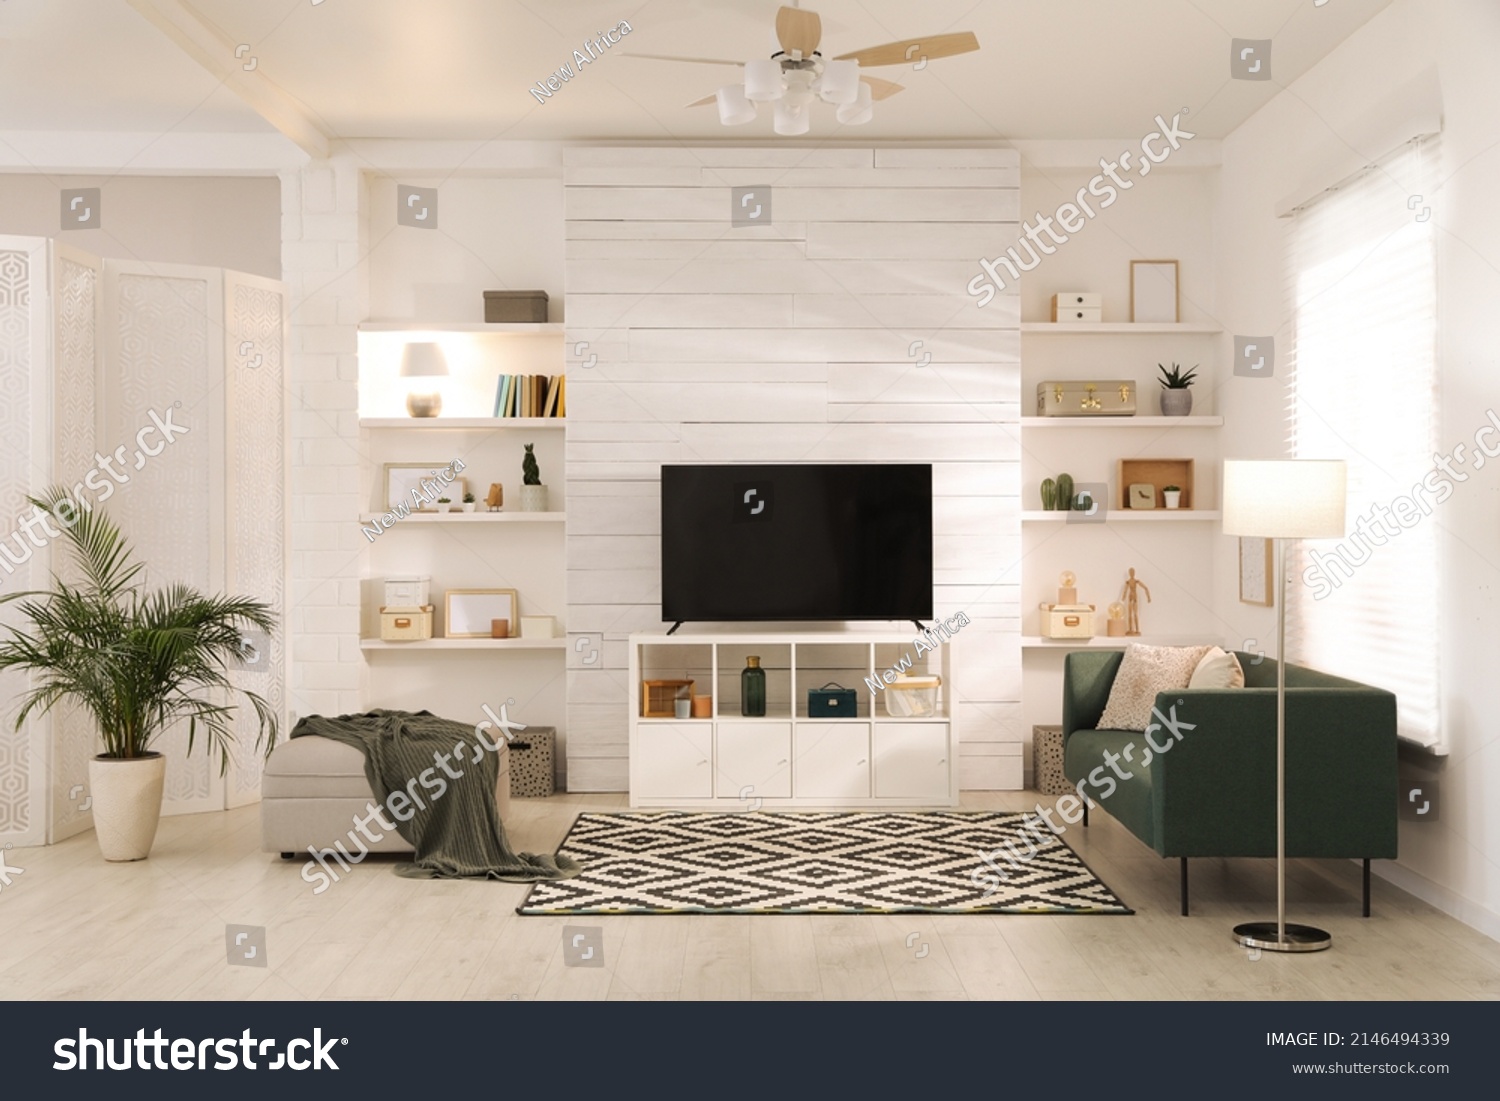 Cozy room interior with stylish furniture, decor and modern TV set #2146494339